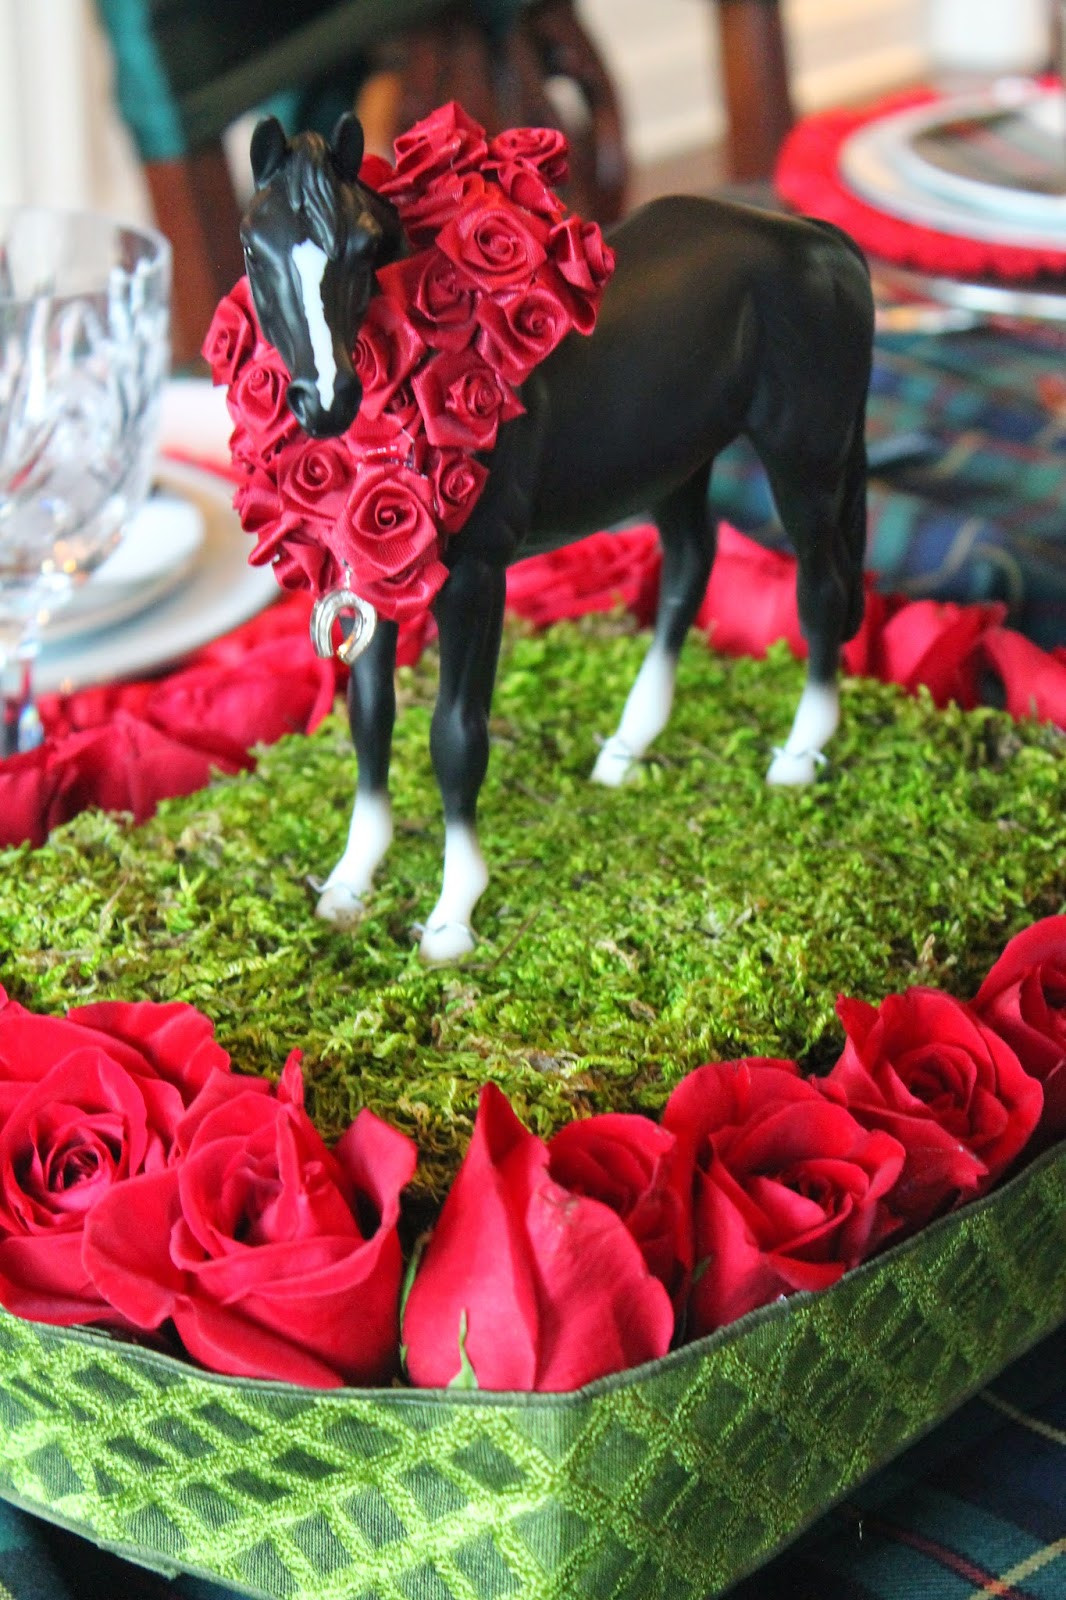 Kentucky Derby Party Pool Ideas
 The Polohouse Kentucky Derby Party Tablescape